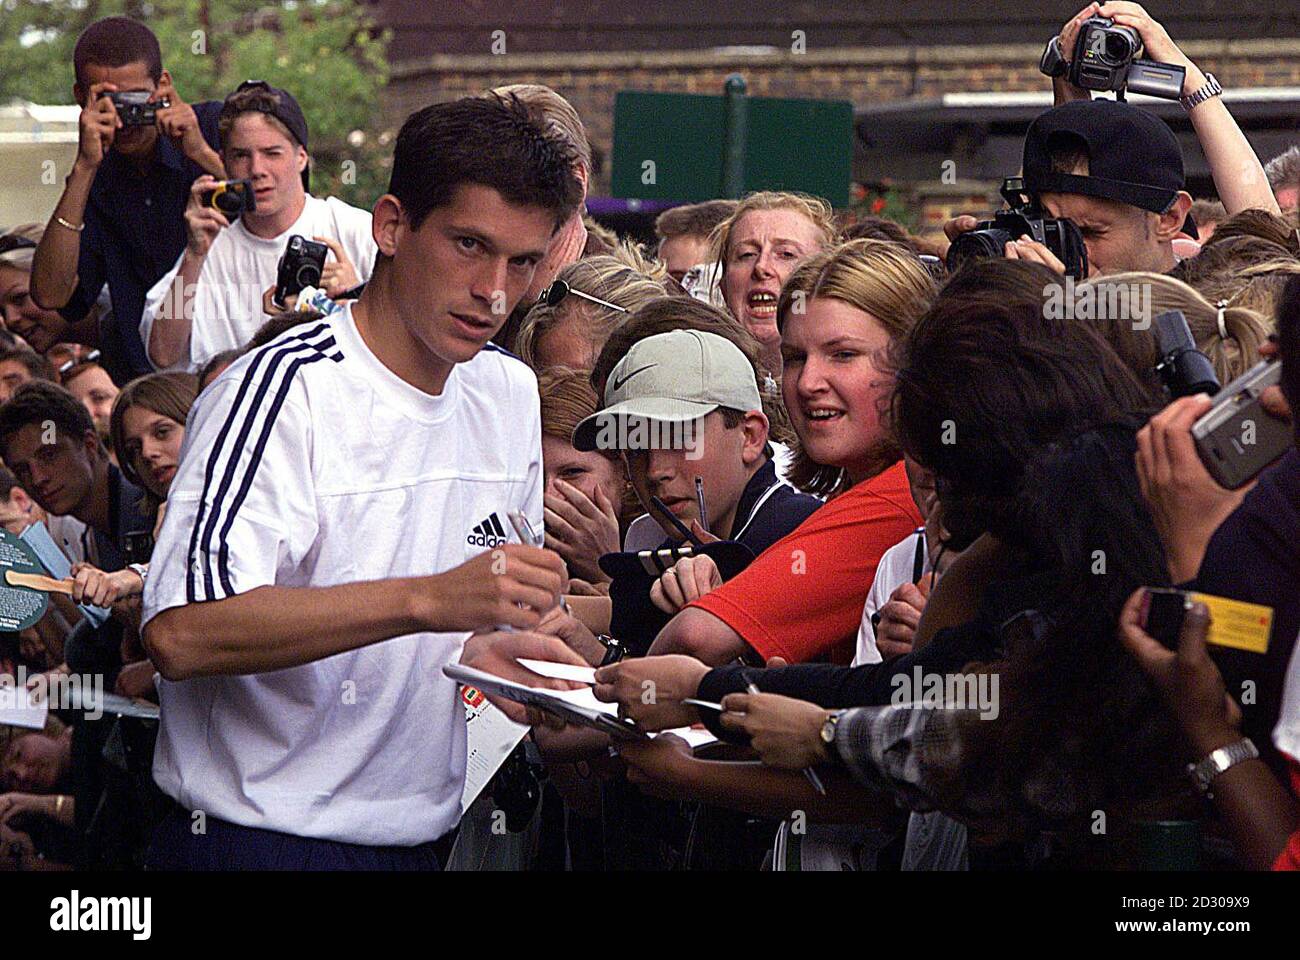 No Commercial Use. British tennis star Tim Henman signs autographs before he leaves Wimbledon after he lost his semi-final match against Pete Sampras 3-6, 6-4 , 6-3, 6-4. Stock Photo